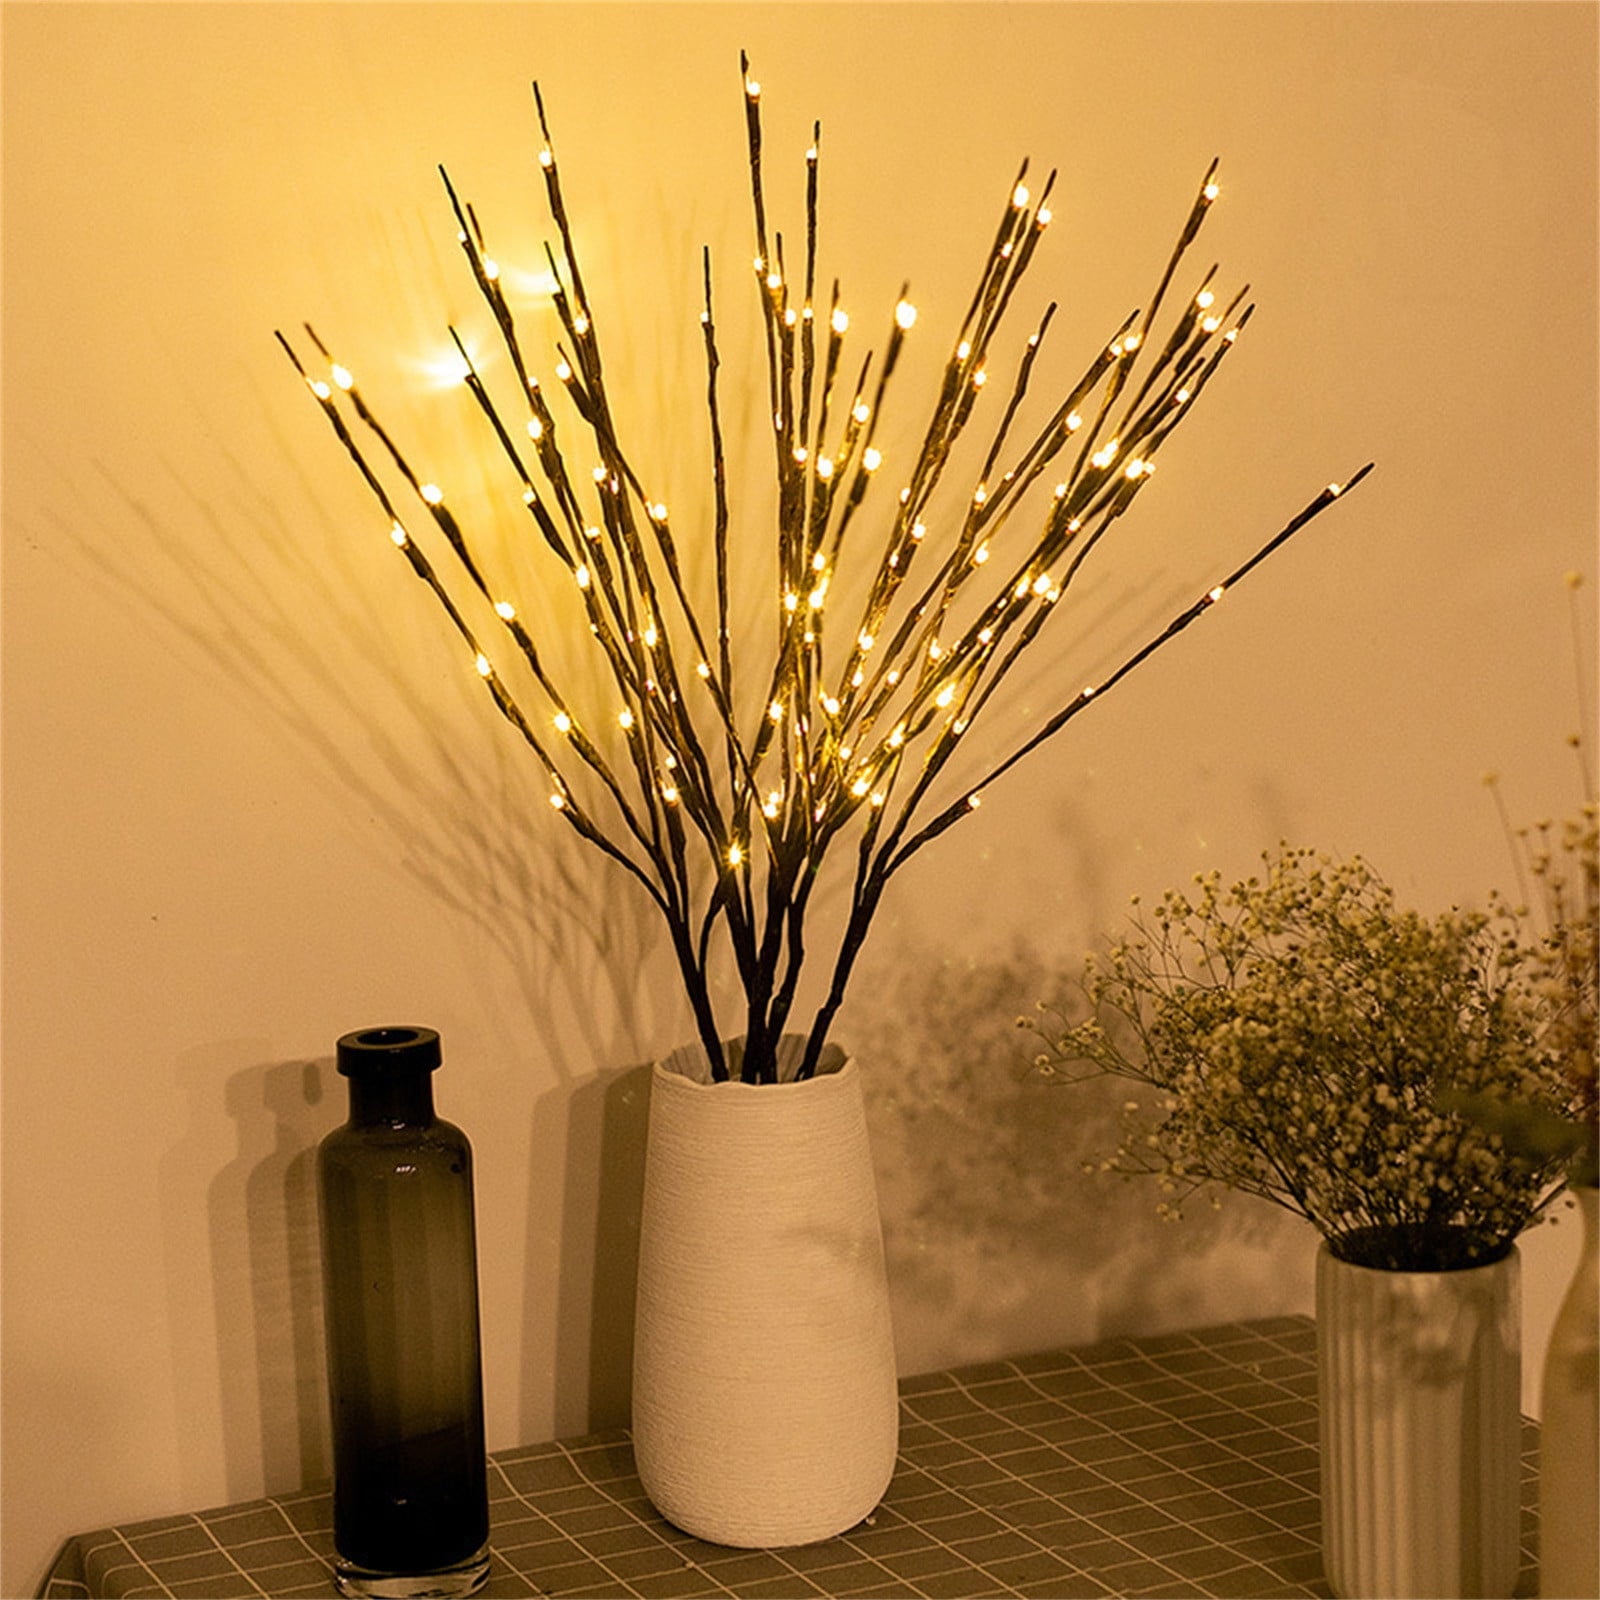 Newest 20LED Willow Branch Lamp Floral Lights Home Christmas Party Garden Decor 